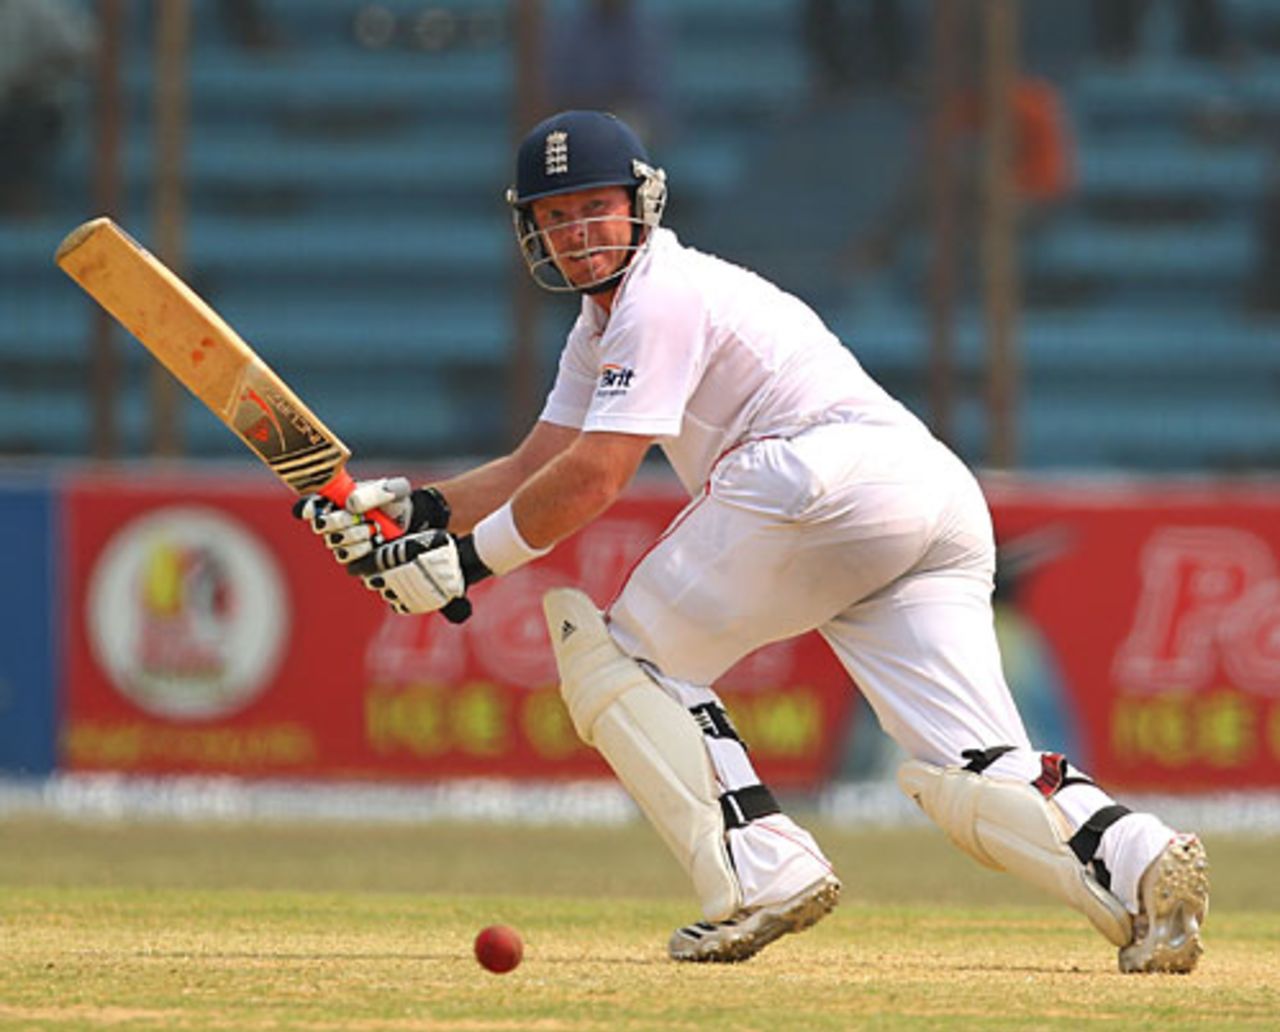 Ian Bell was untroubled as he cruised to another Test fifty, Bangladesh v England, 1st Test, Chittagong, March 13, 2010